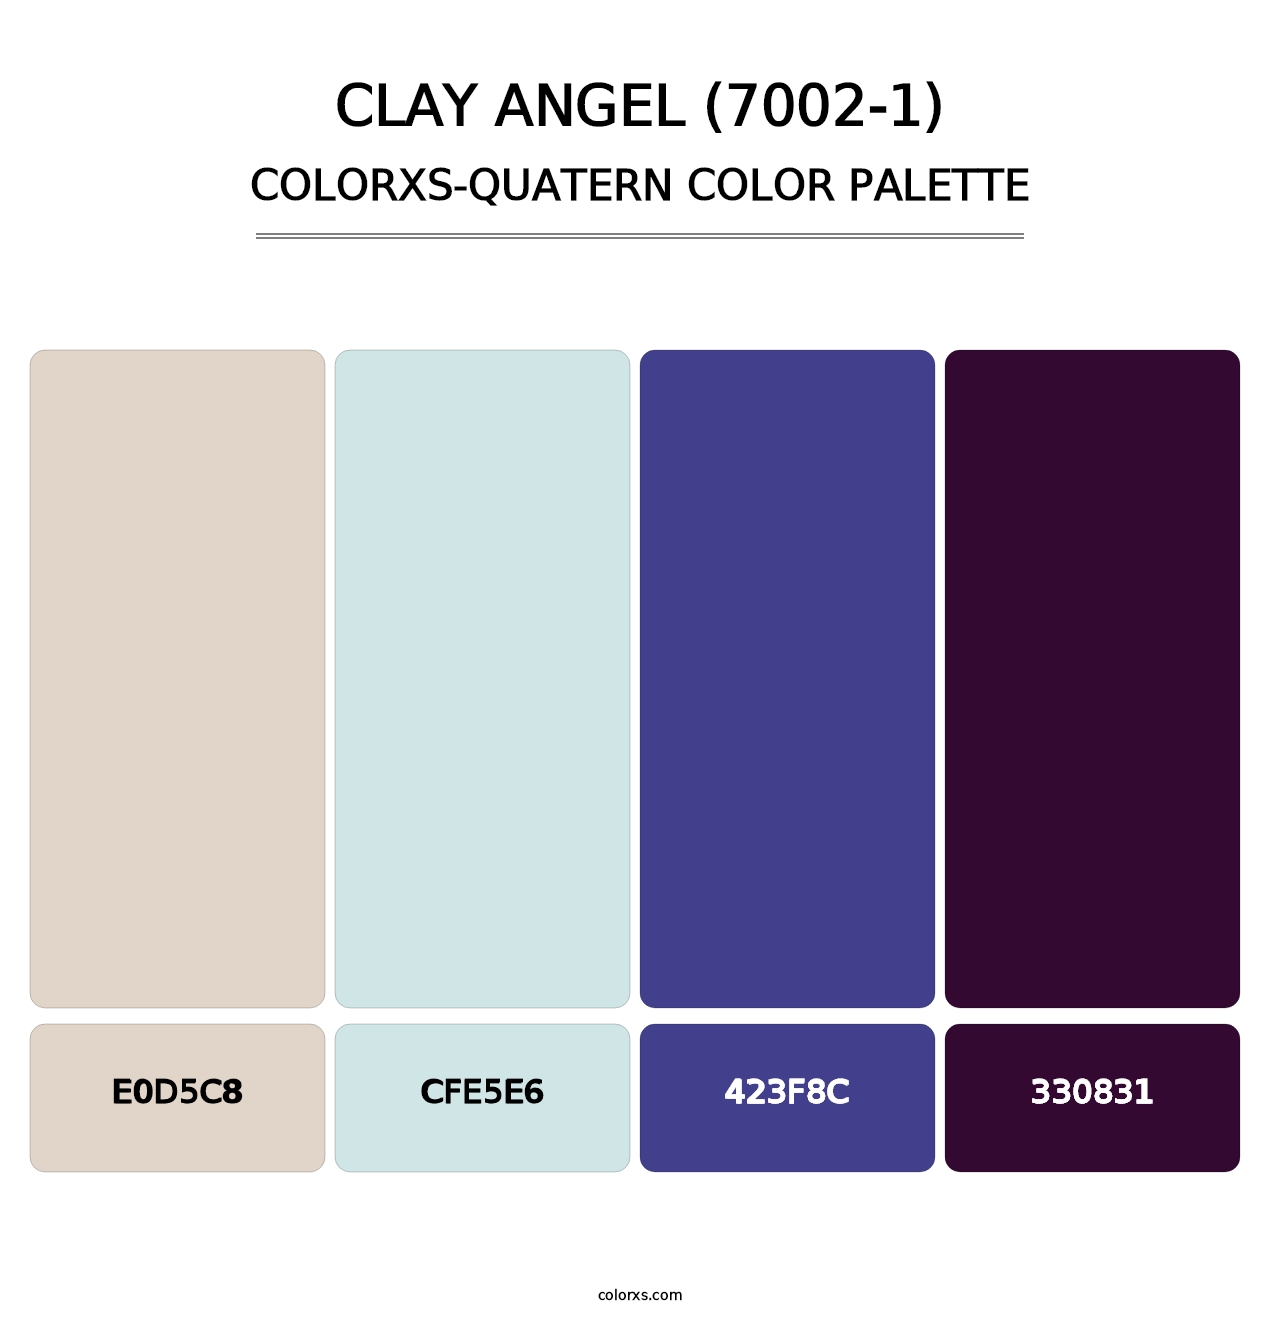 Clay Angel (7002-1) - Colorxs Quatern Palette